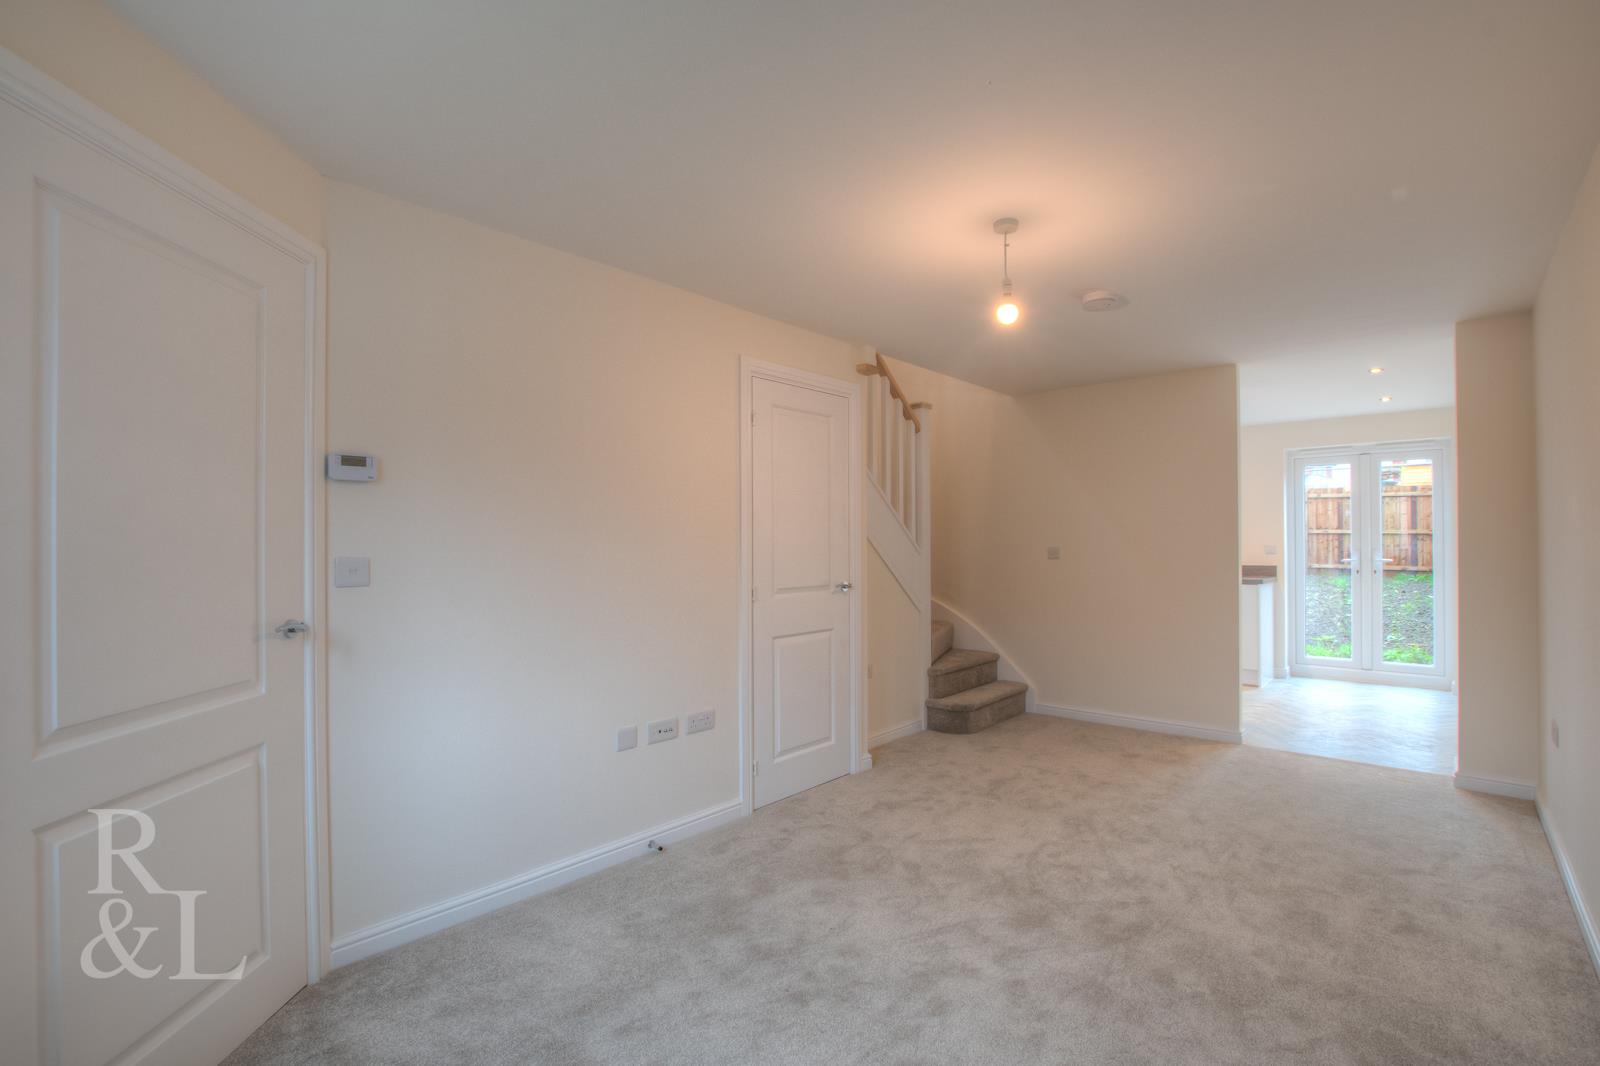 Property image for Redrow at Nicker Hill, Keyworth